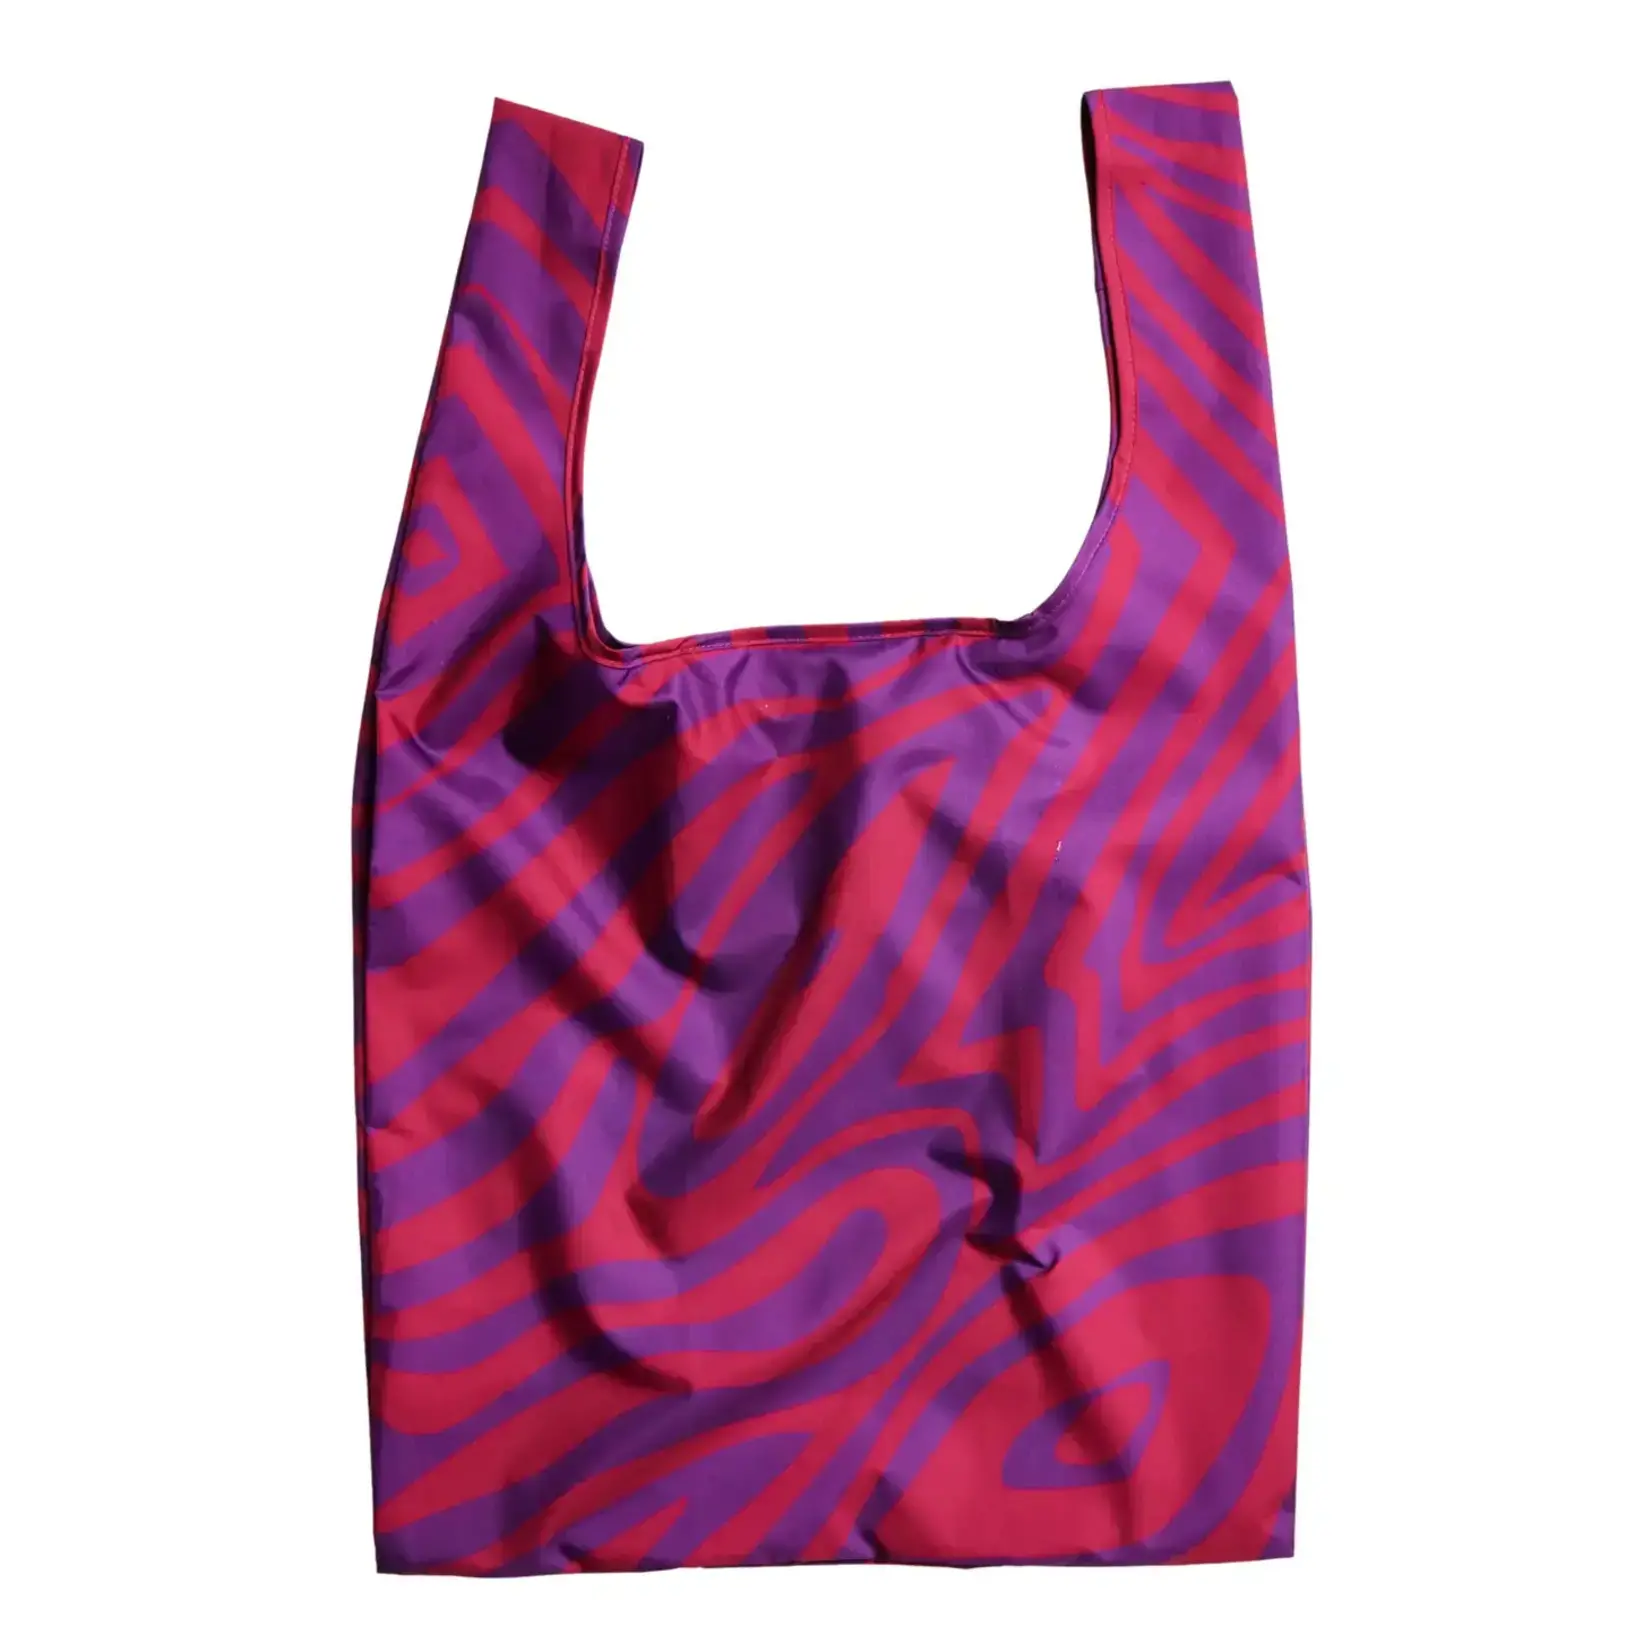 Swirl in Pink Reusable Eco Friendly Bag